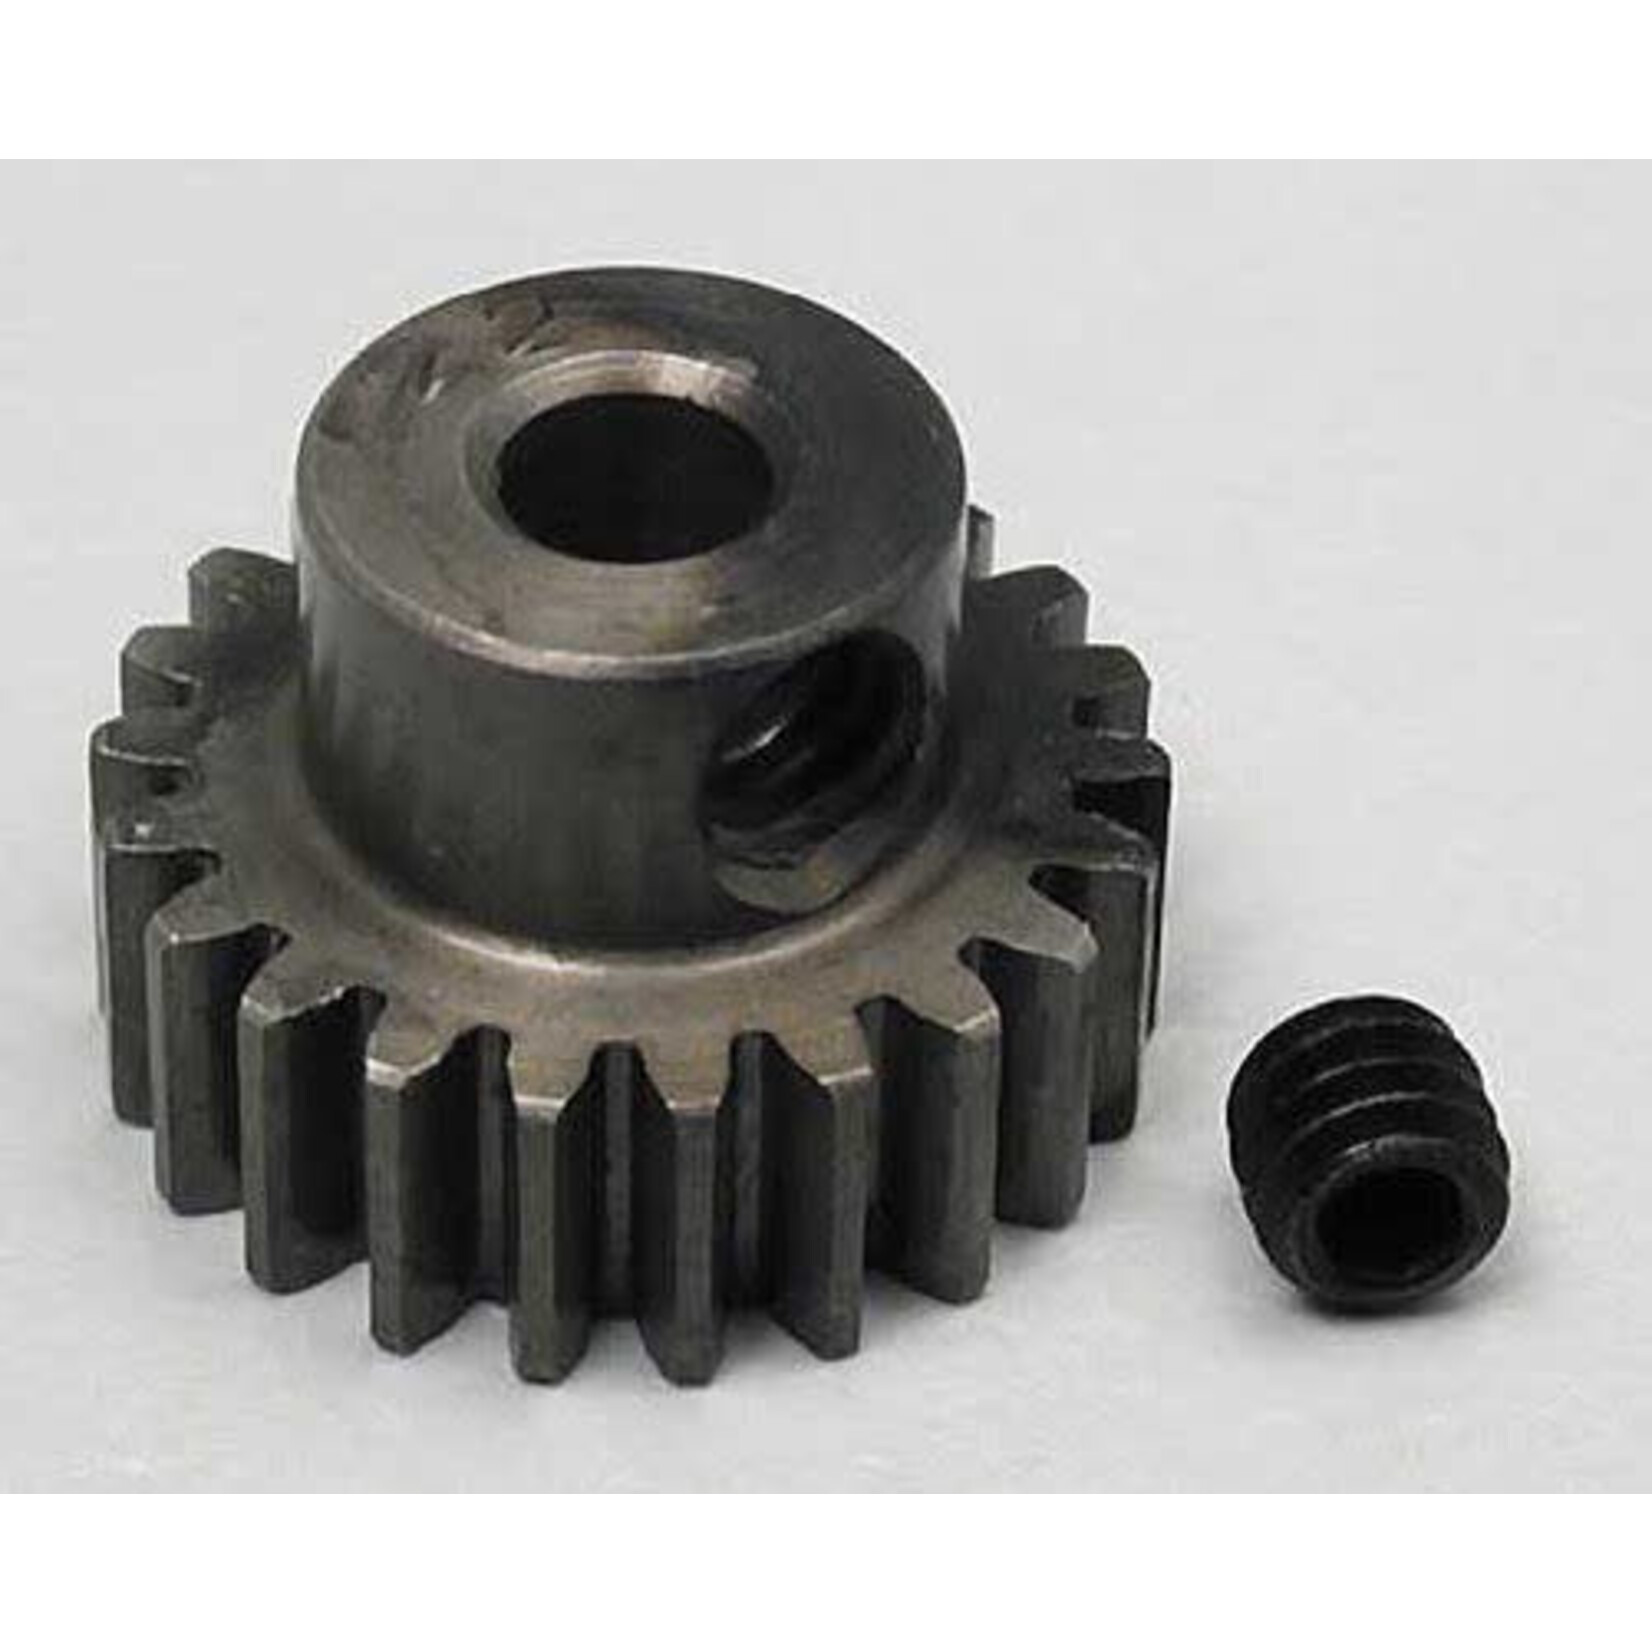 Robinson Racing Products (RRP) 48P Absolute Pinion, 22T